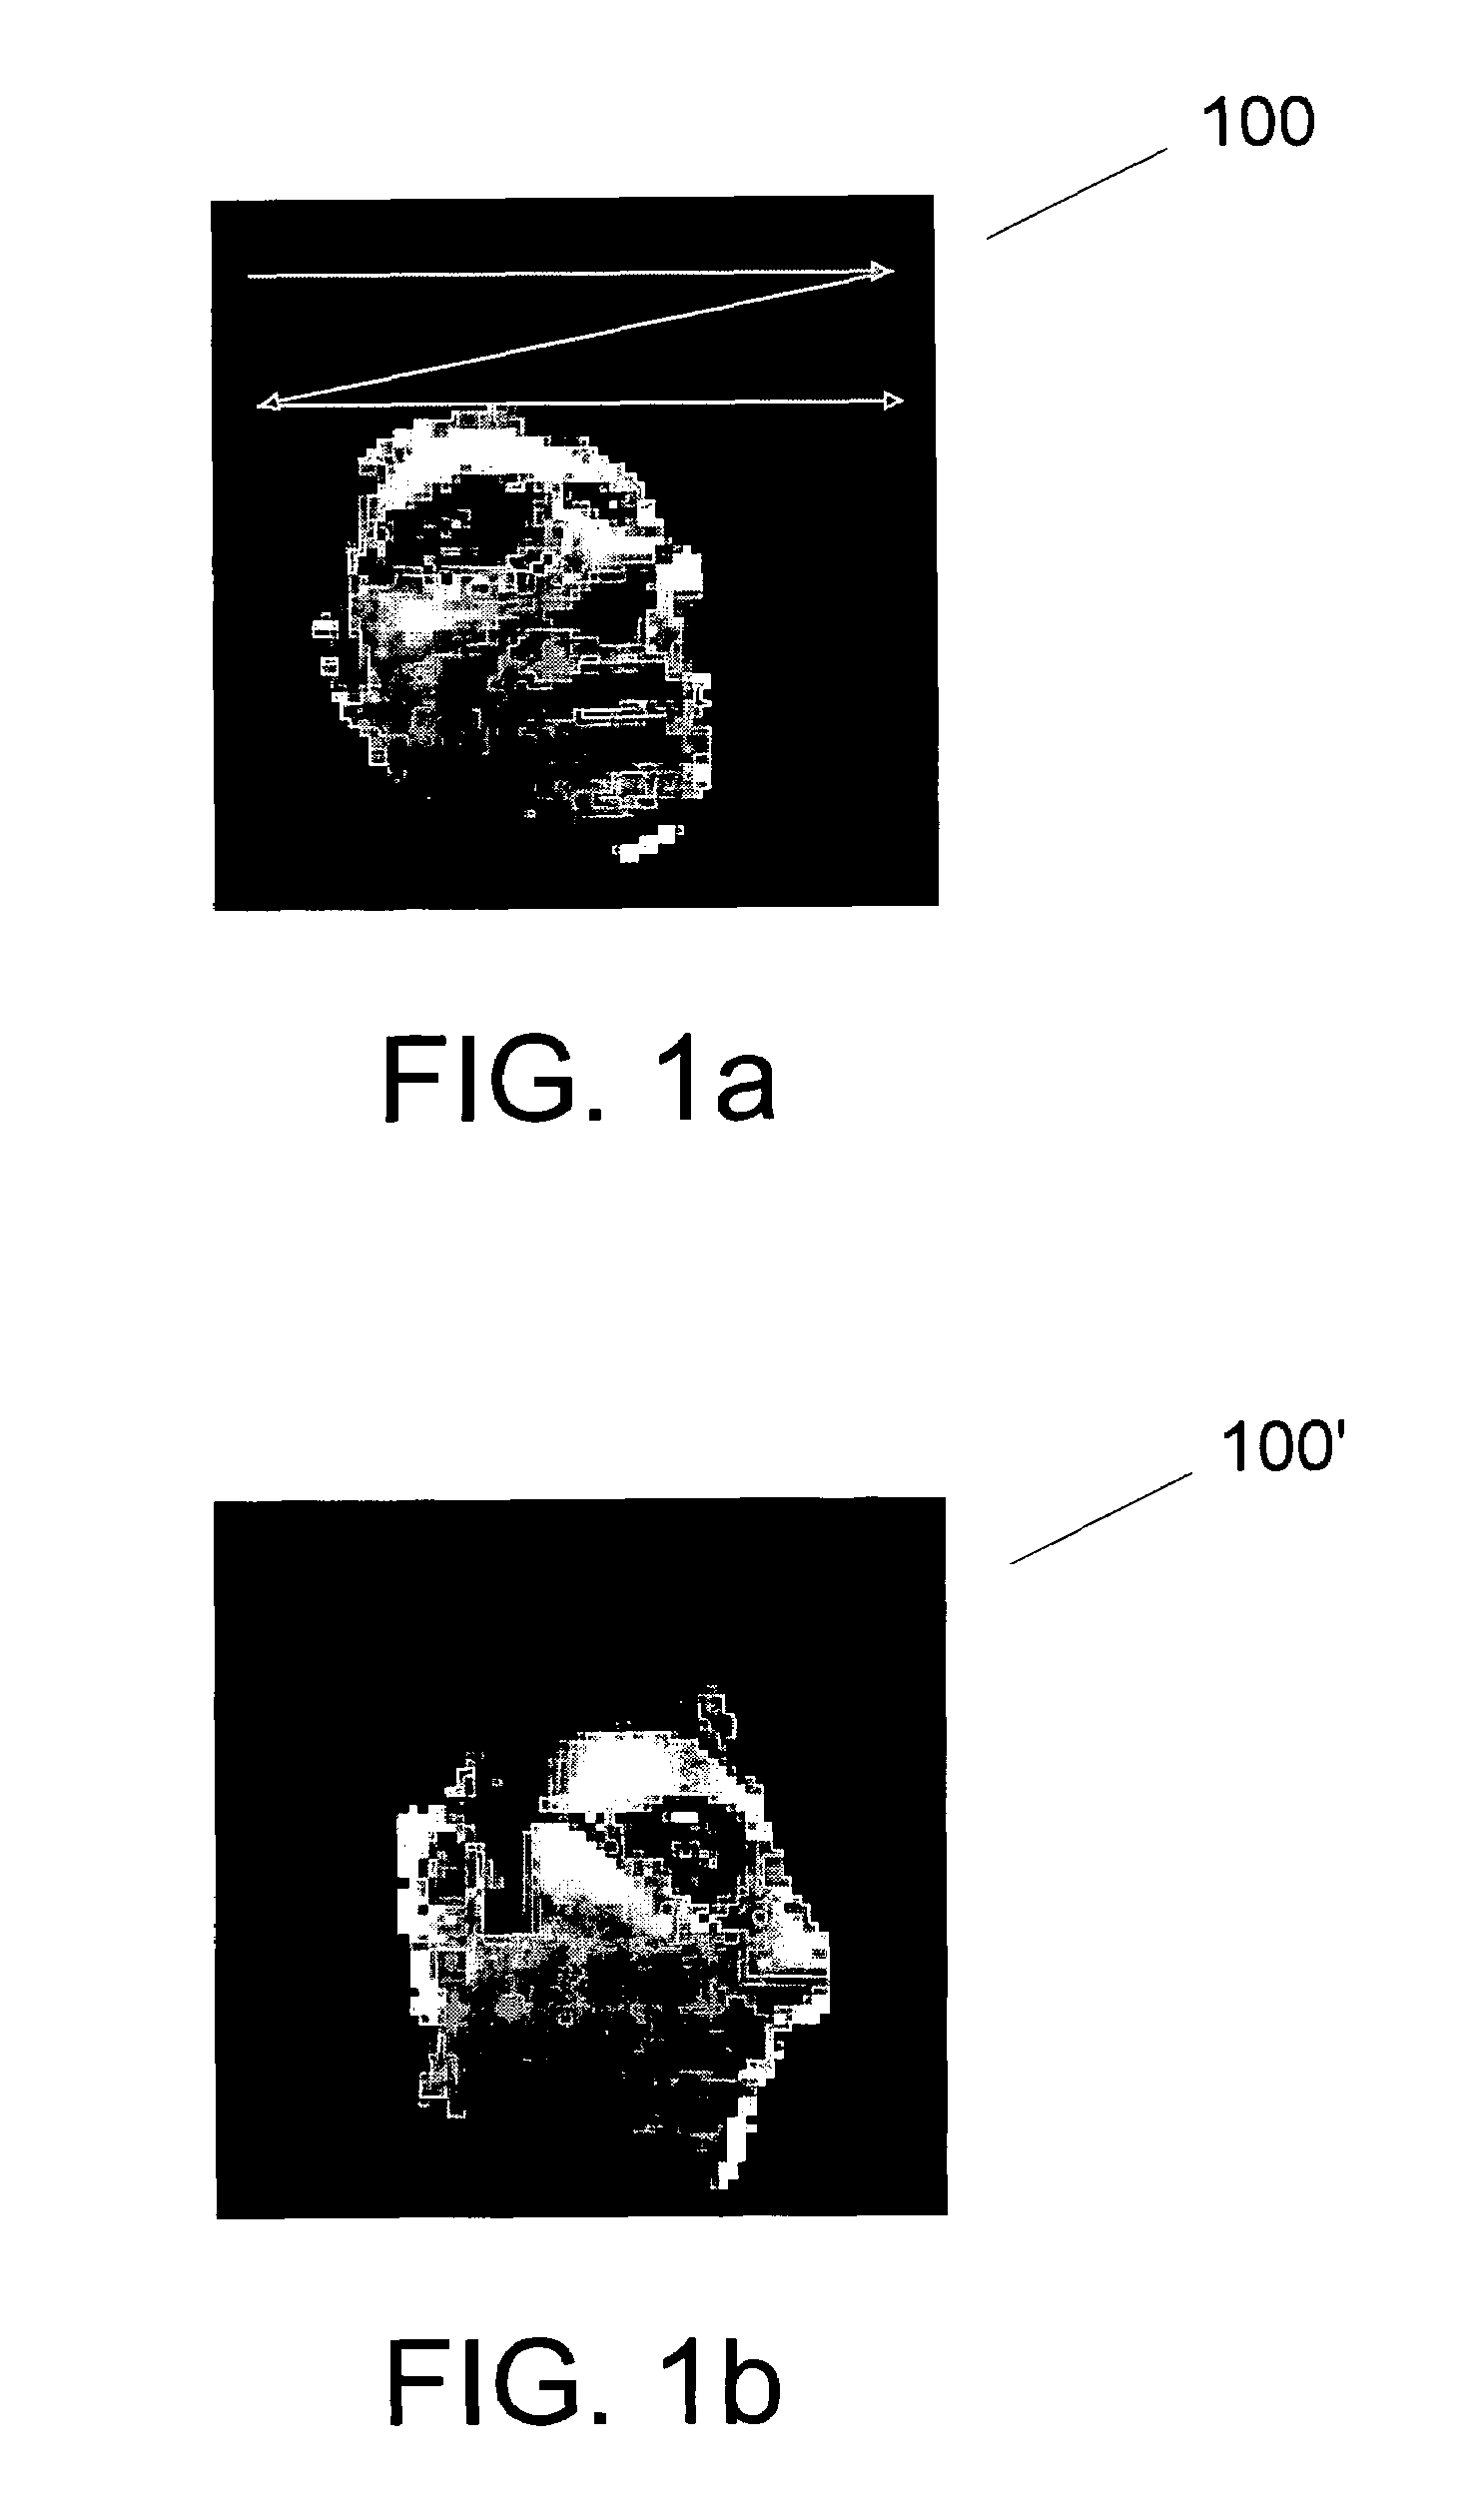 Ordered data compression system and methods using principle component analysis